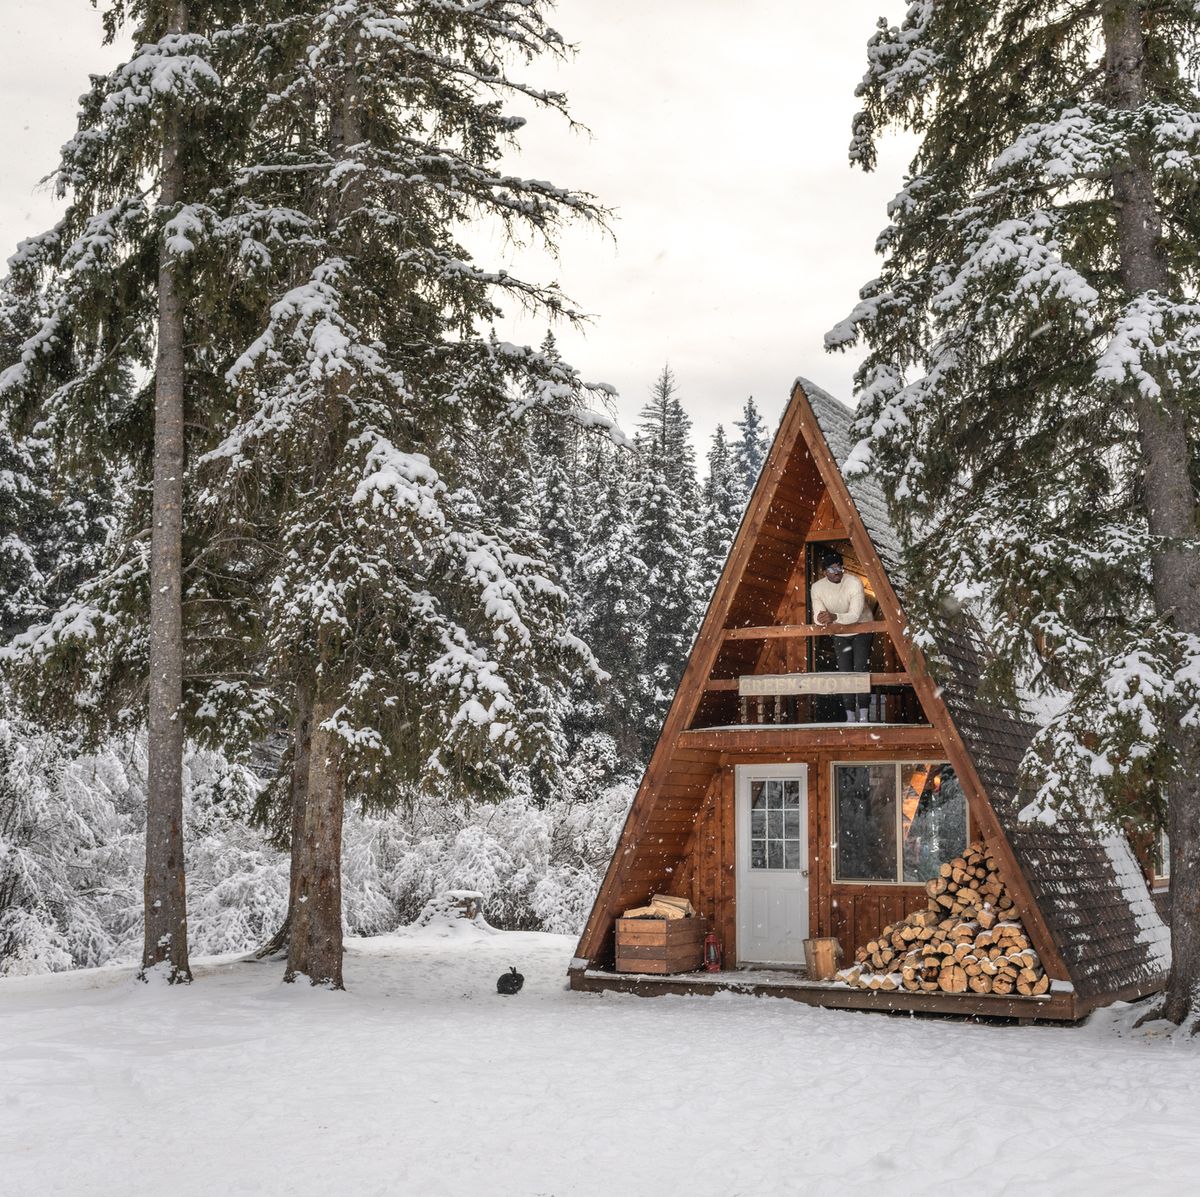 15 Winter Cabins for Rent - Best Winter Cabins in the U.S.